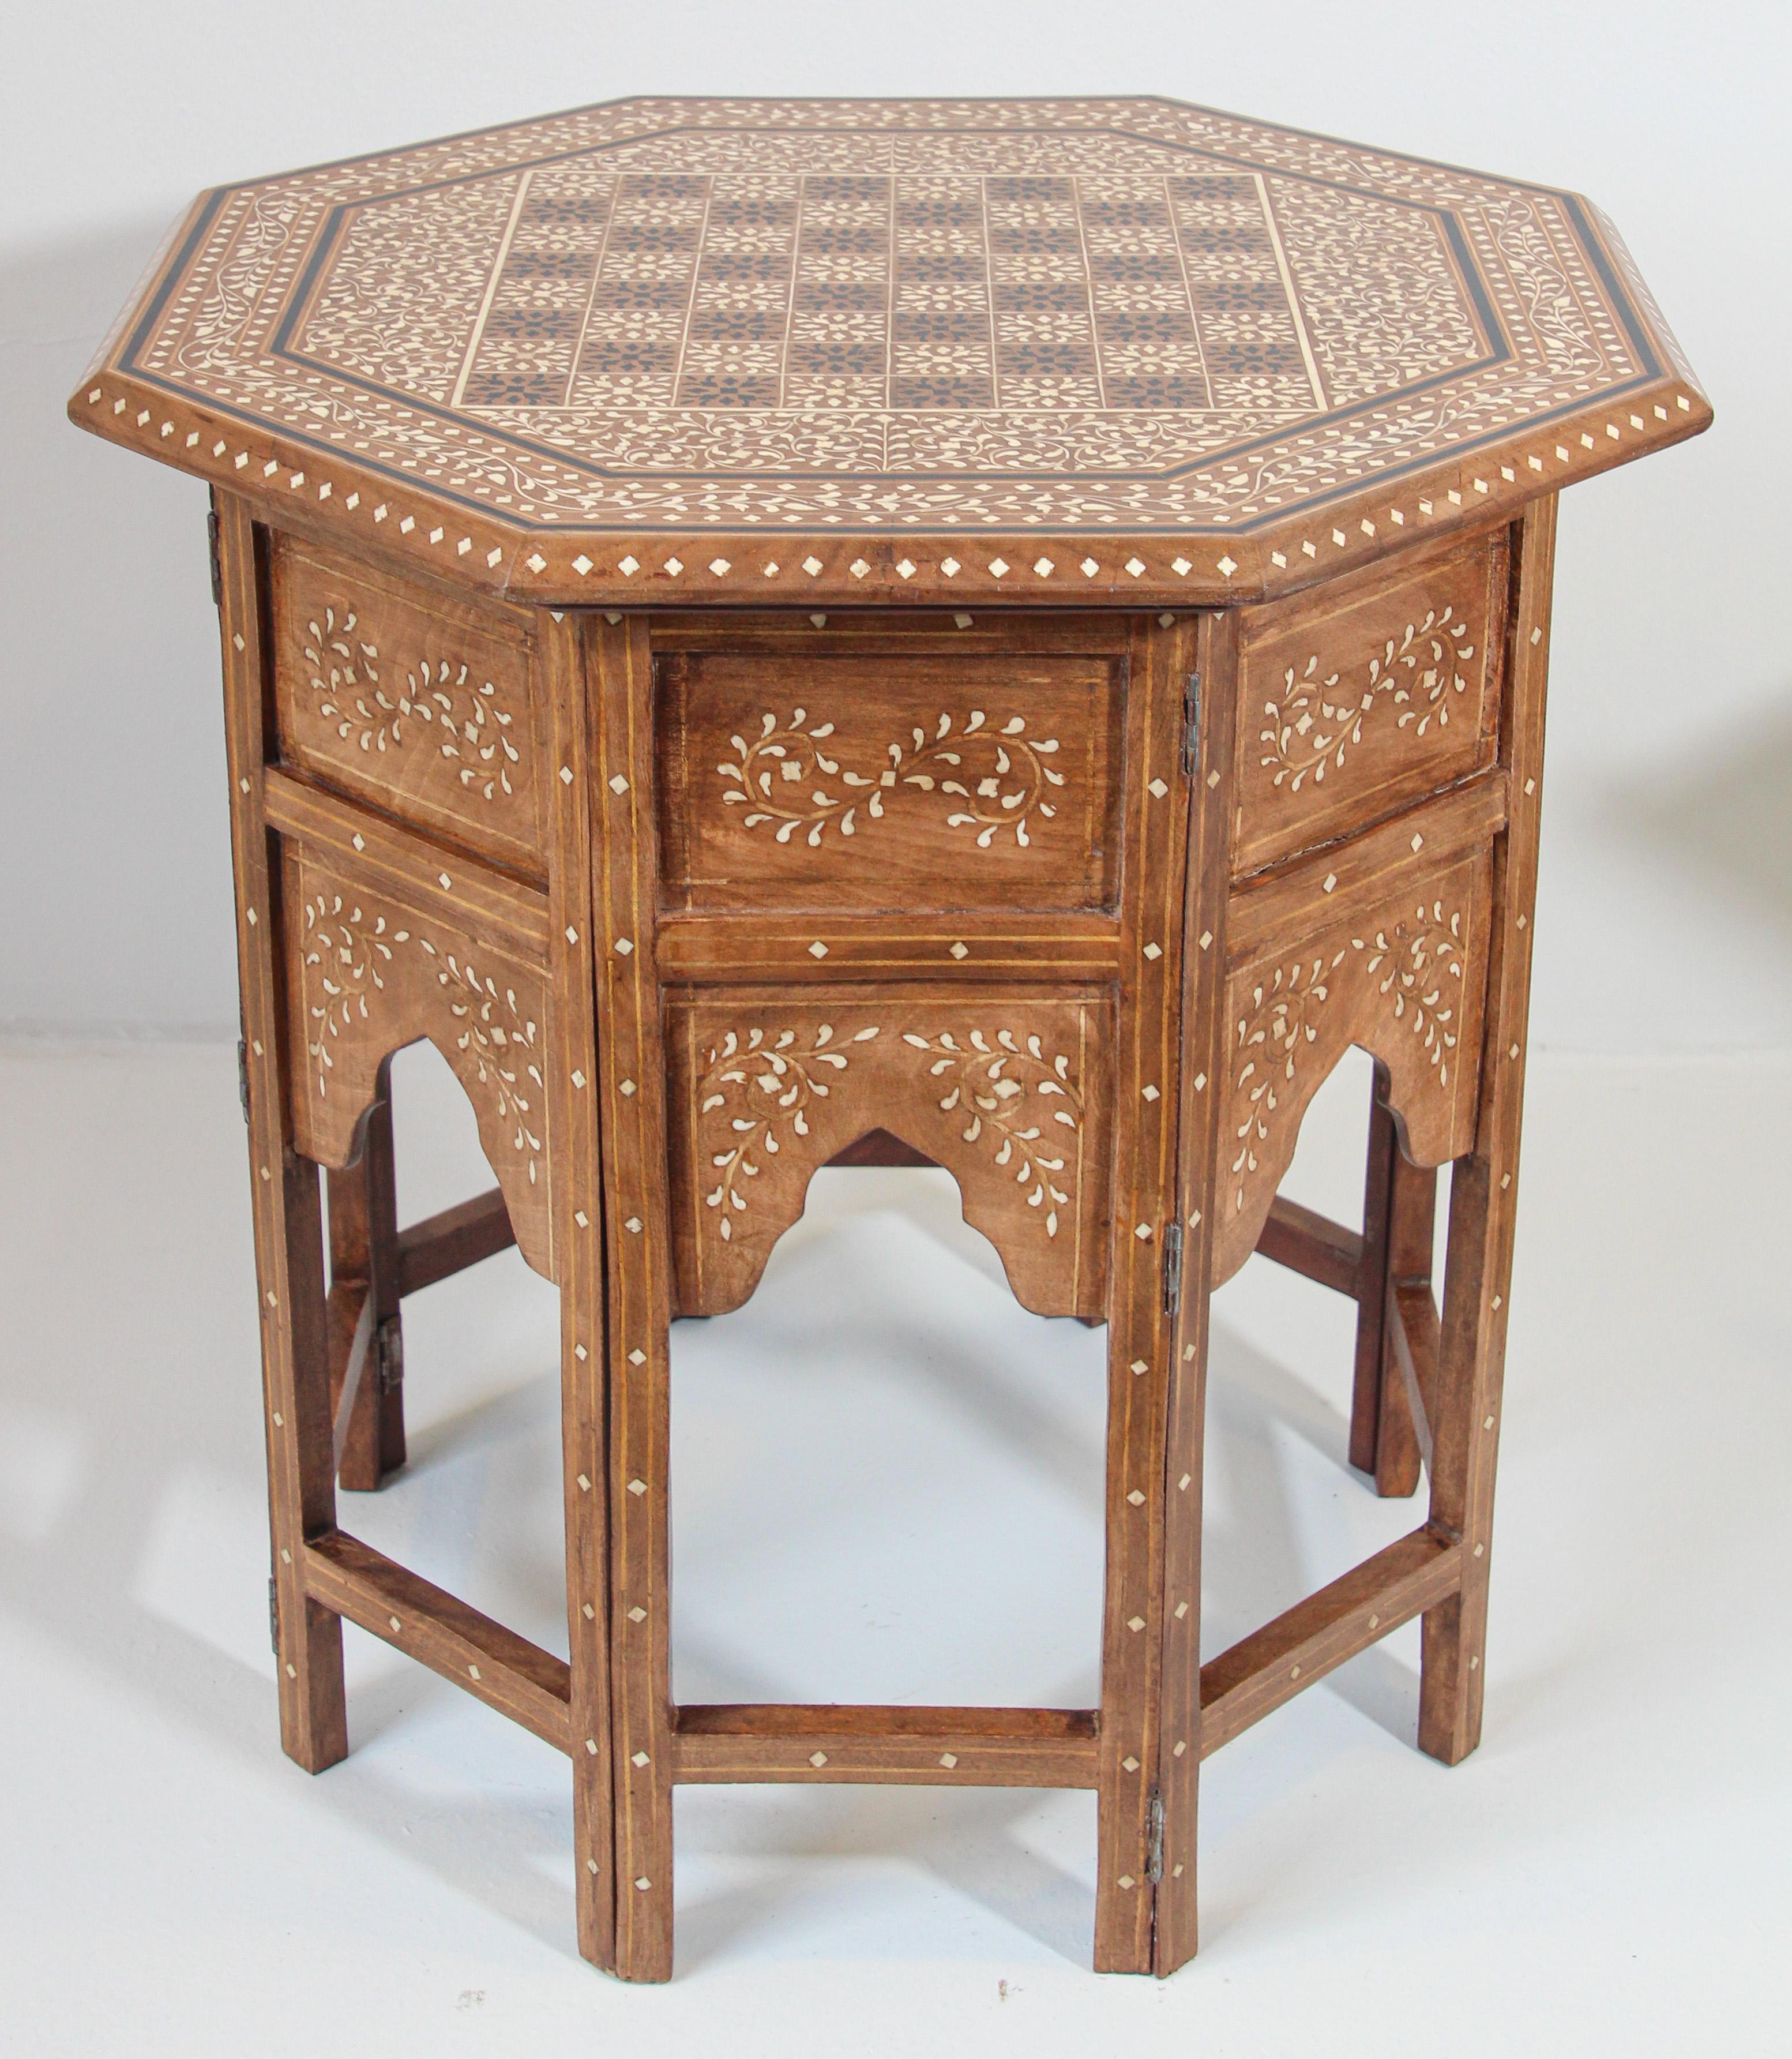 Anglo-Indian octagonal Mughal Moorish chess game table with bone inlay.
Vintage fine and elegant Anglo Indian folding Moorish Mughal teak octagonal open arches side table.
Large Anglo-Indian wood end table finely carved and inlaid with the top